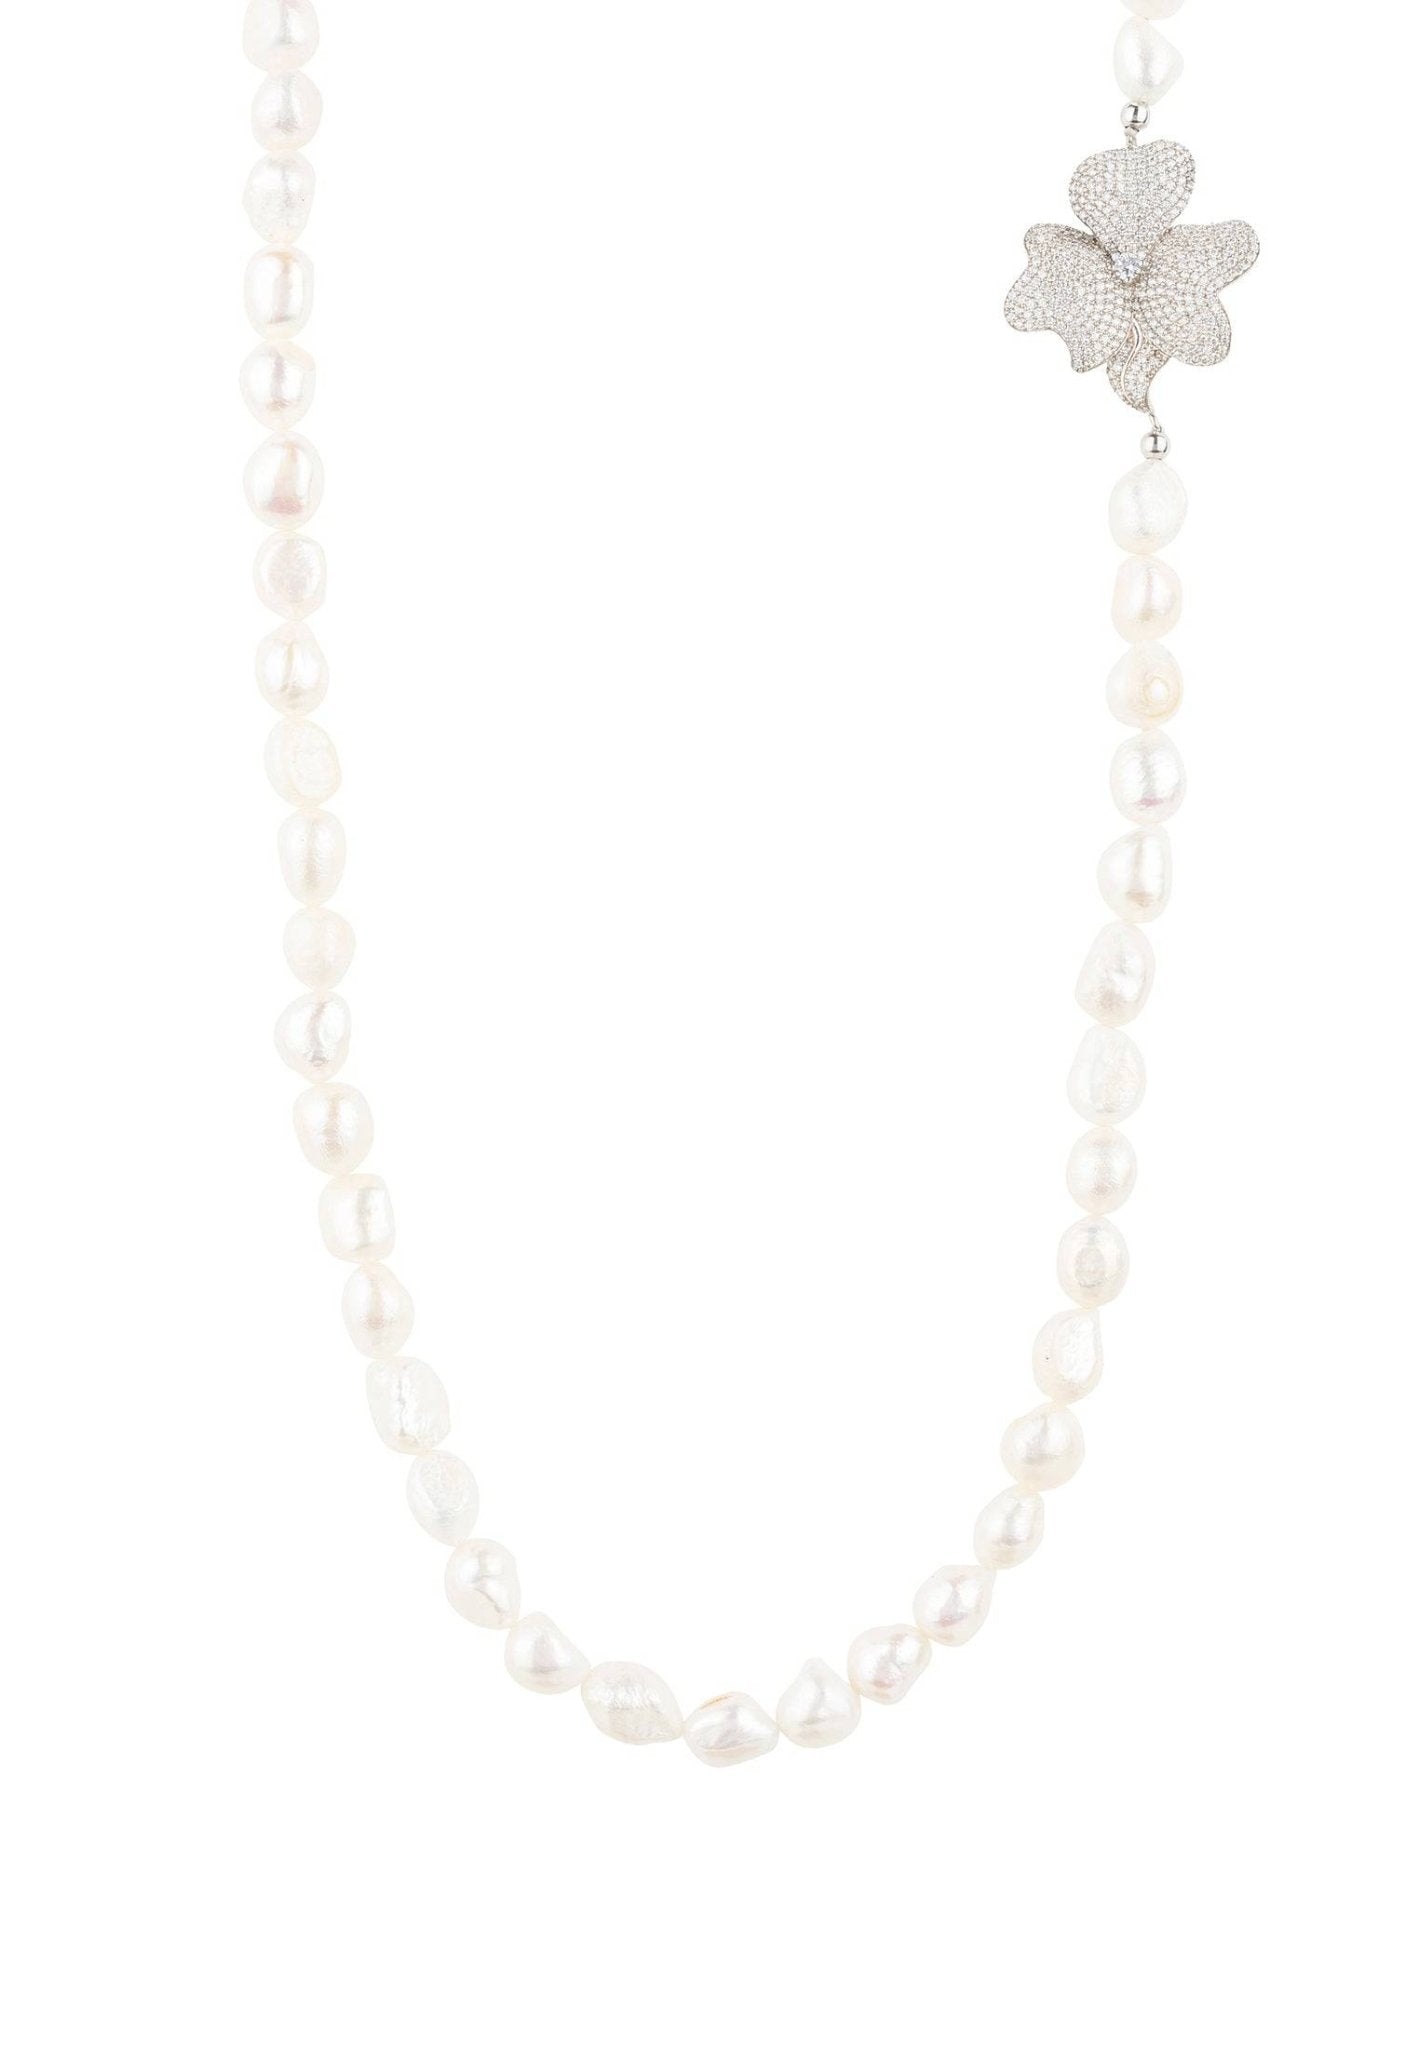 Flower Pearl Gemstone Long Necklace White Cz Silver - LATELITA Necklaces